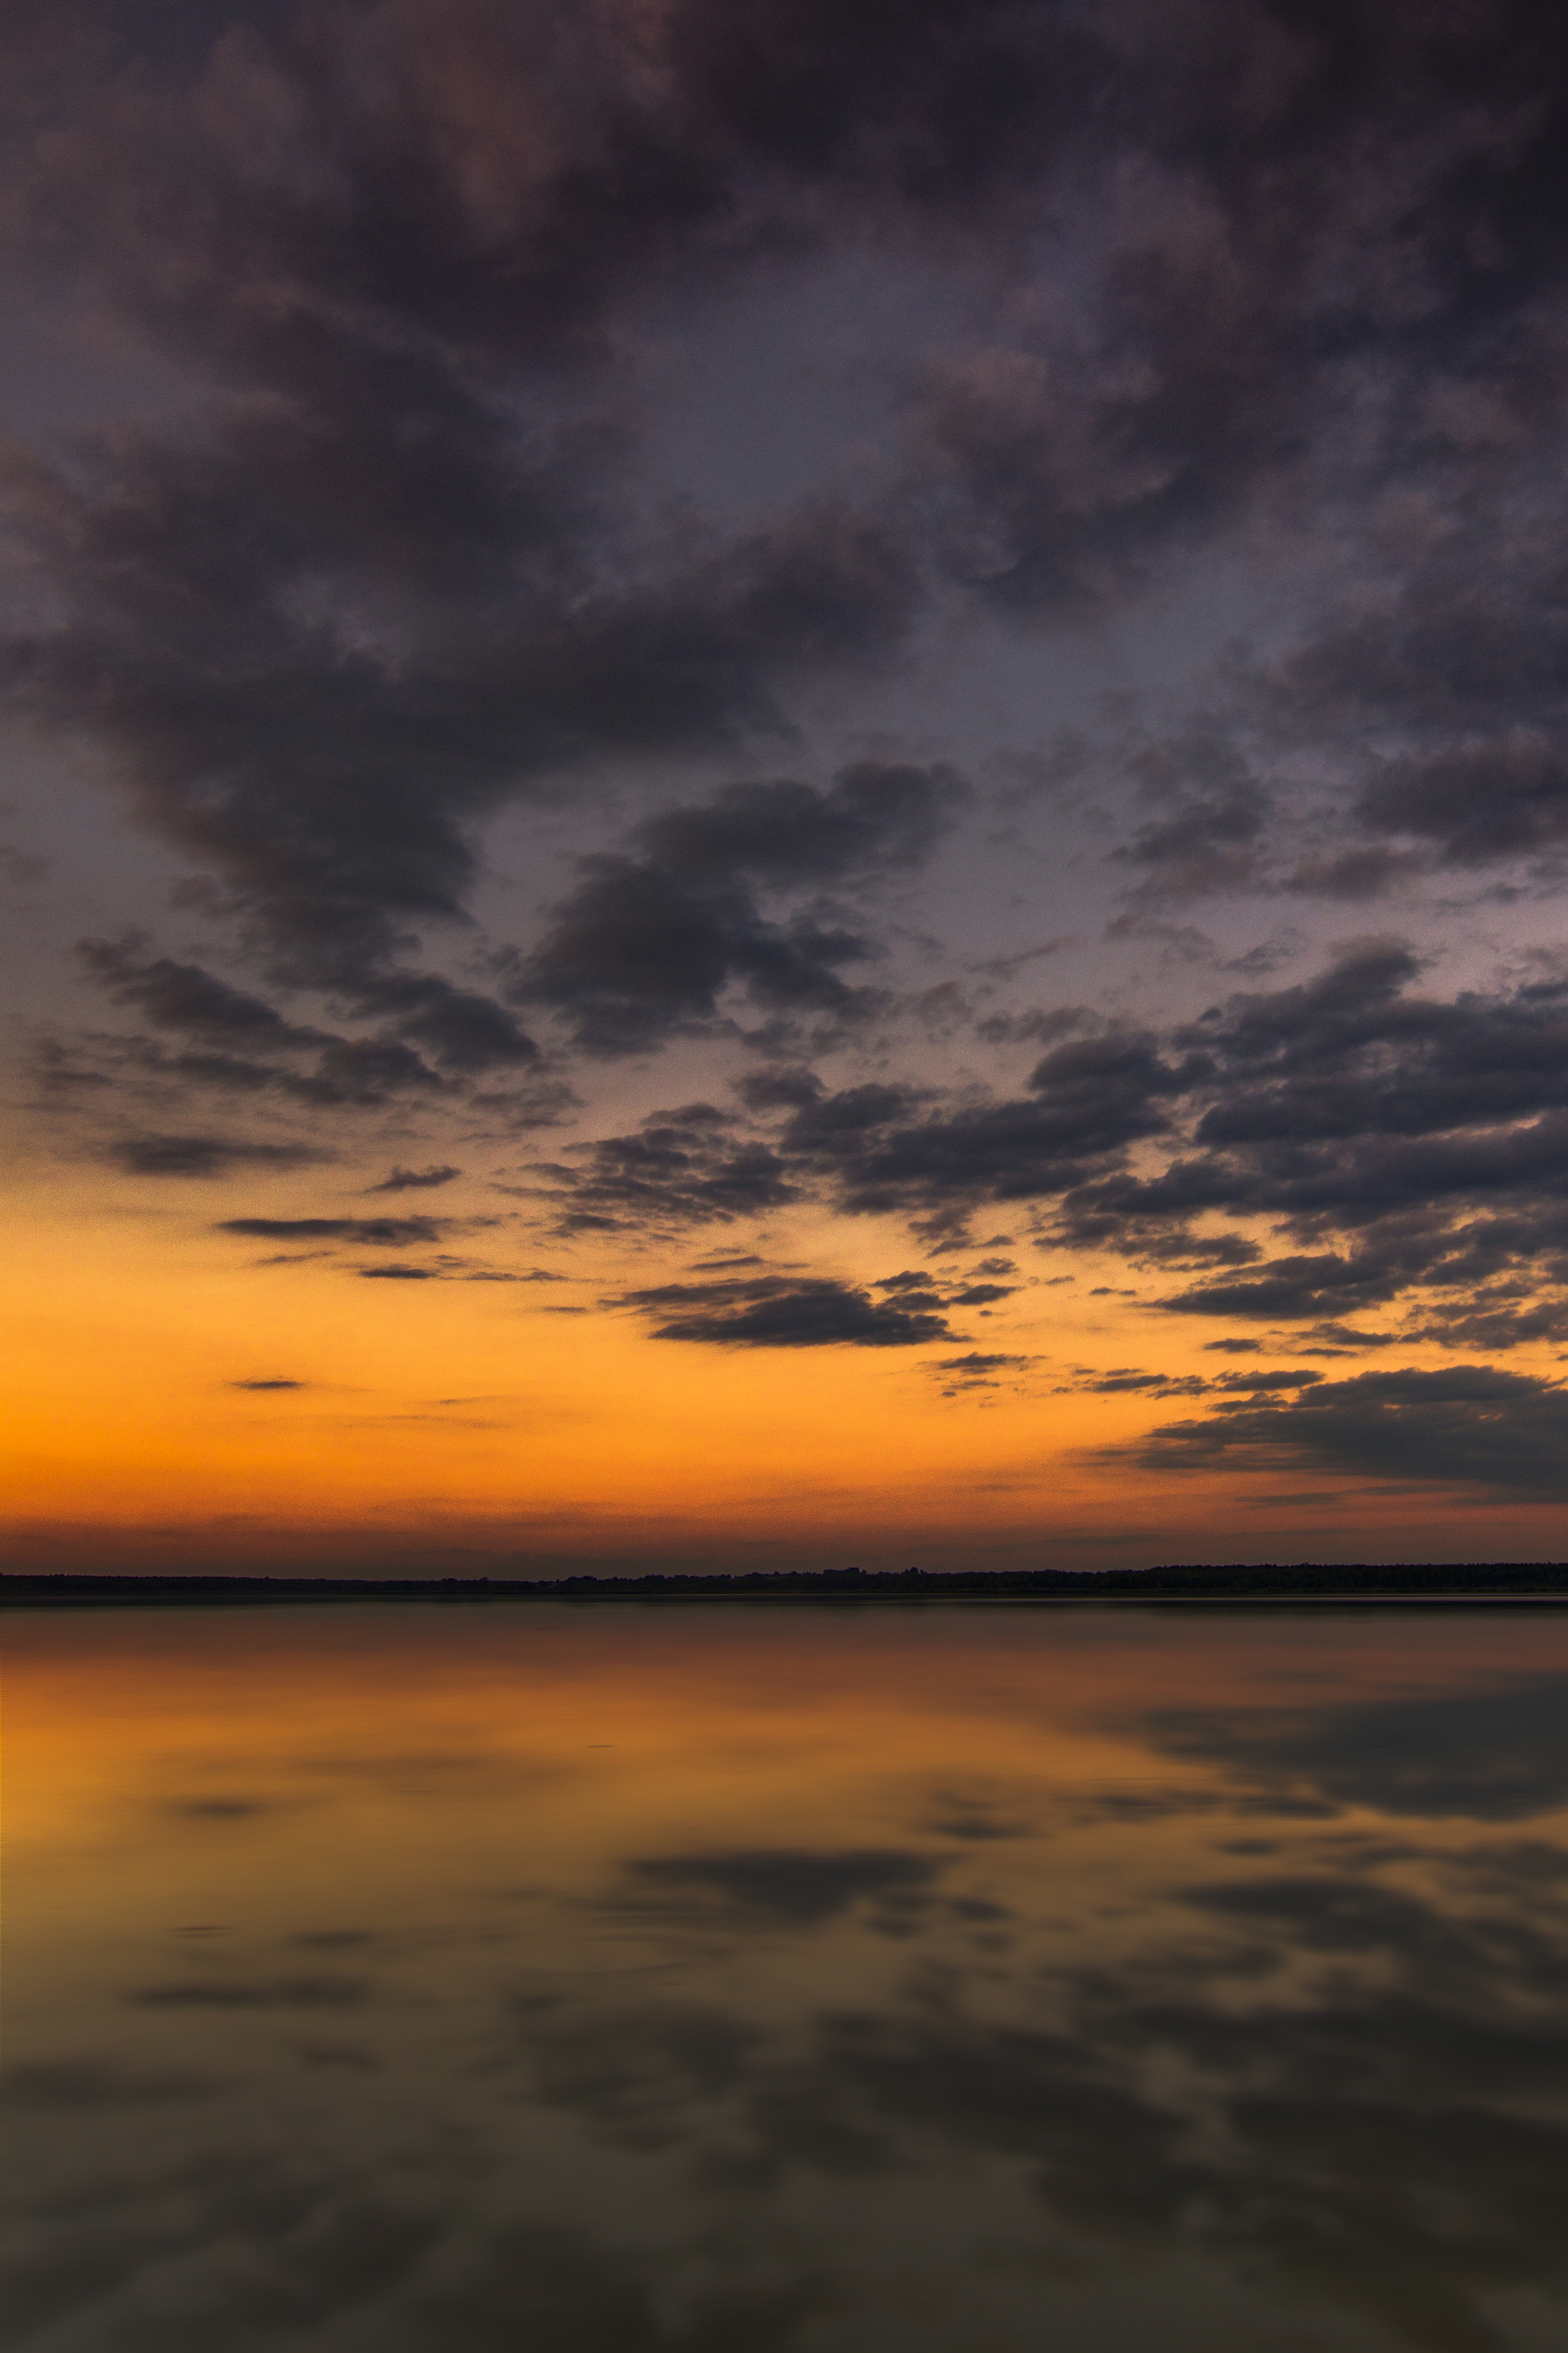 pVertical, Photography, Sunset, Water, Sky, Nature, Reflection, Tranquil, Tranquility, Lake, Cloud, Landscape, Clam, Świerklaniec, Poland, Damian Cyfka